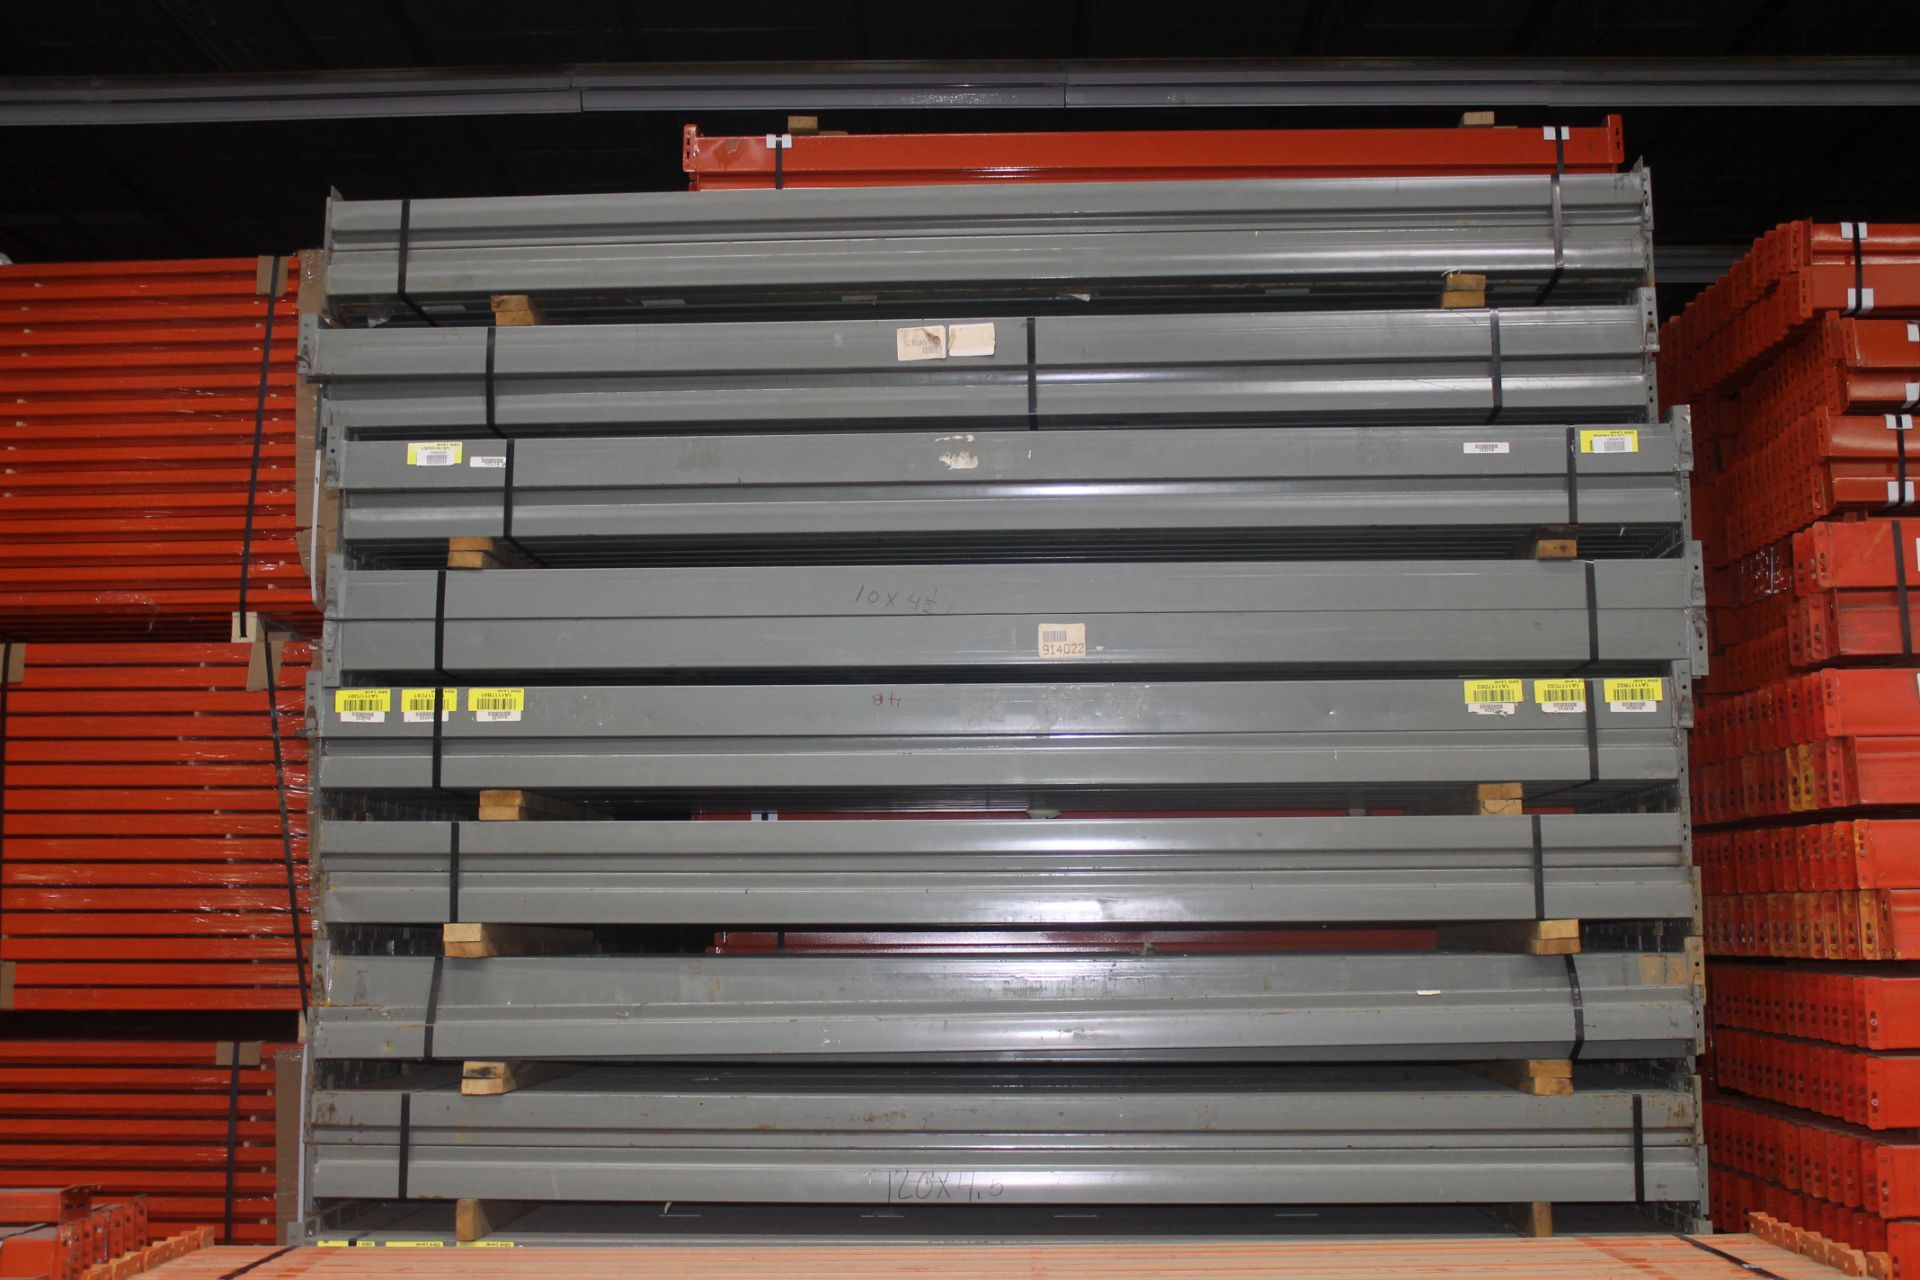 7 BAYS OF TEARDROP STYLE PALLET RACK, SIZE: 14'H x 48"D X 10'W (3 BEAM LEVEL) - Image 3 of 3